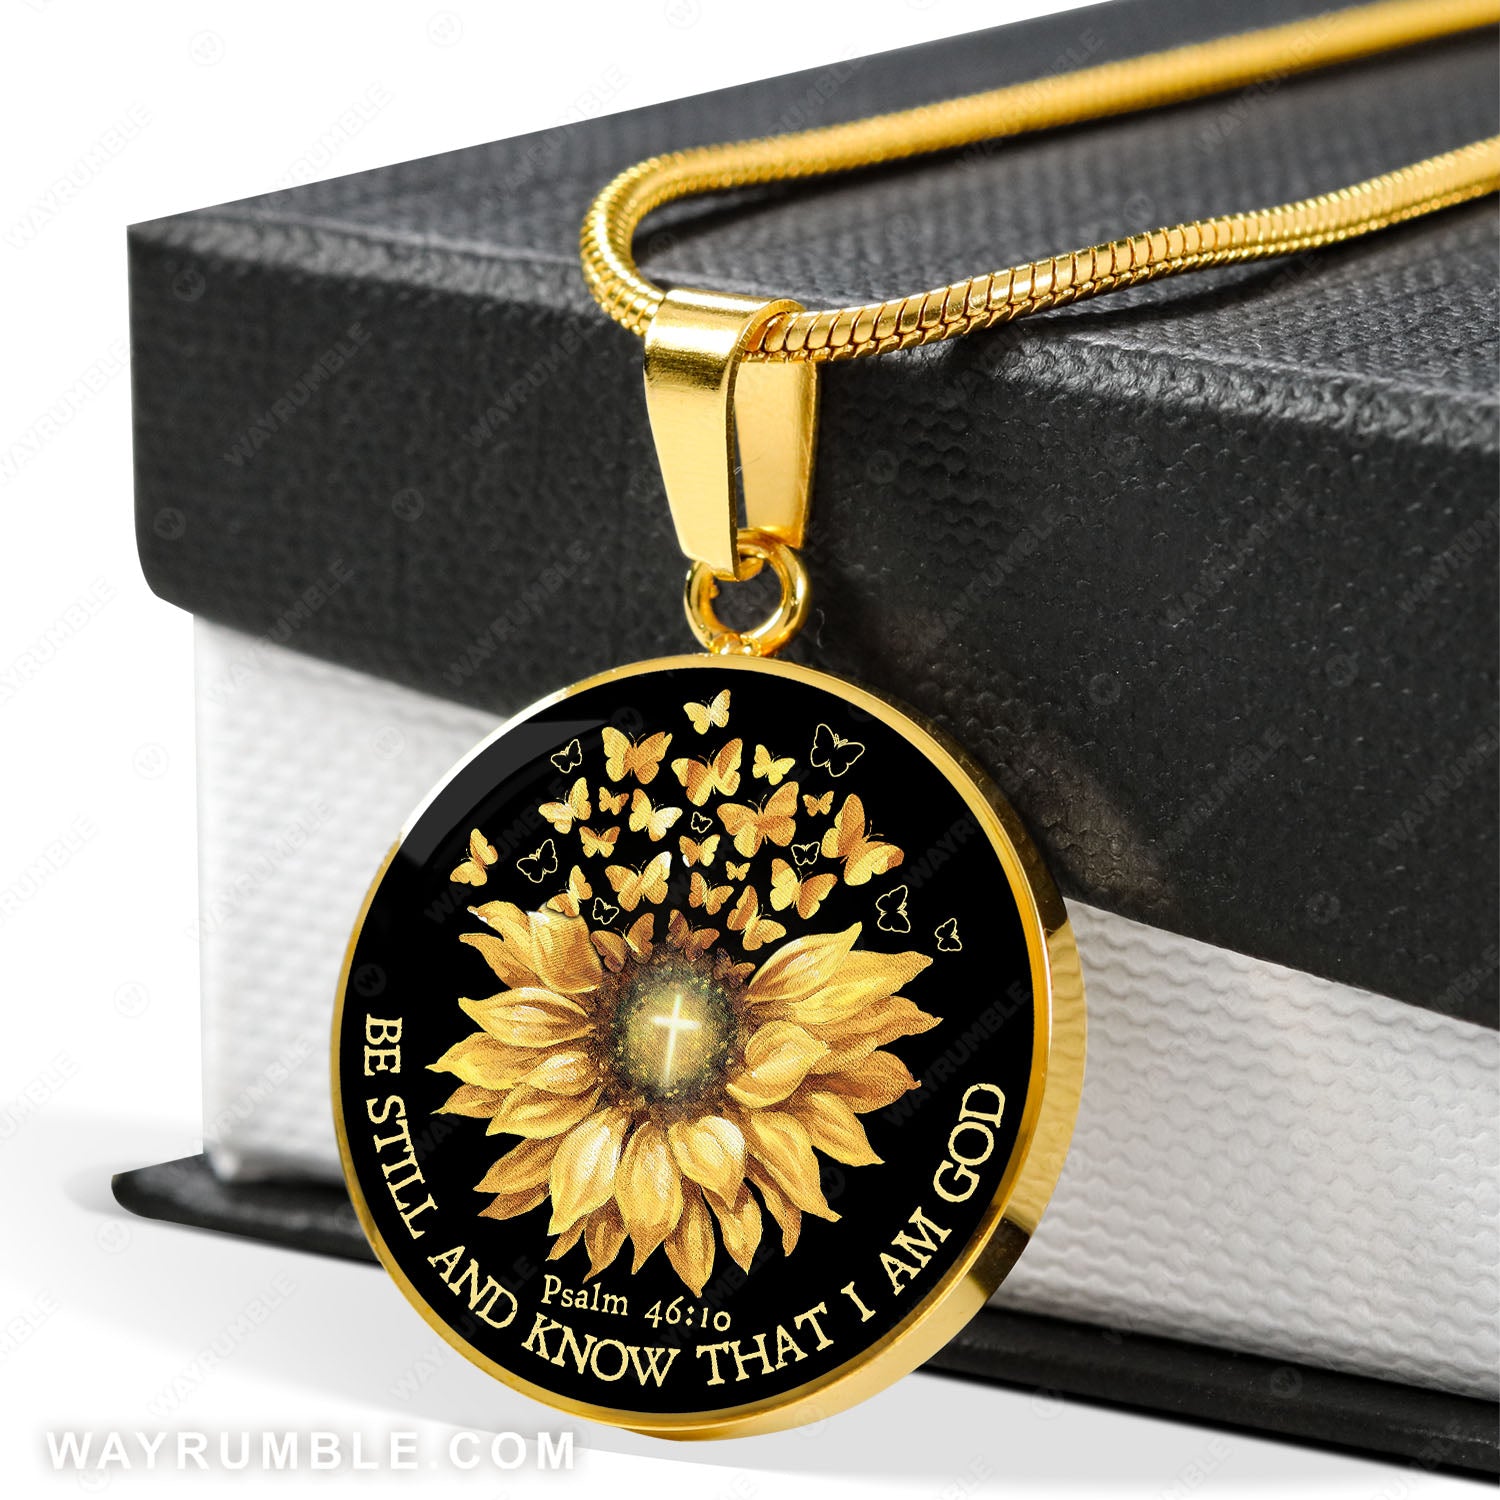 Big sunflower, Yellow butterfly, Cross symbol, Be still and know that I am God - Jesus Circle Necklace